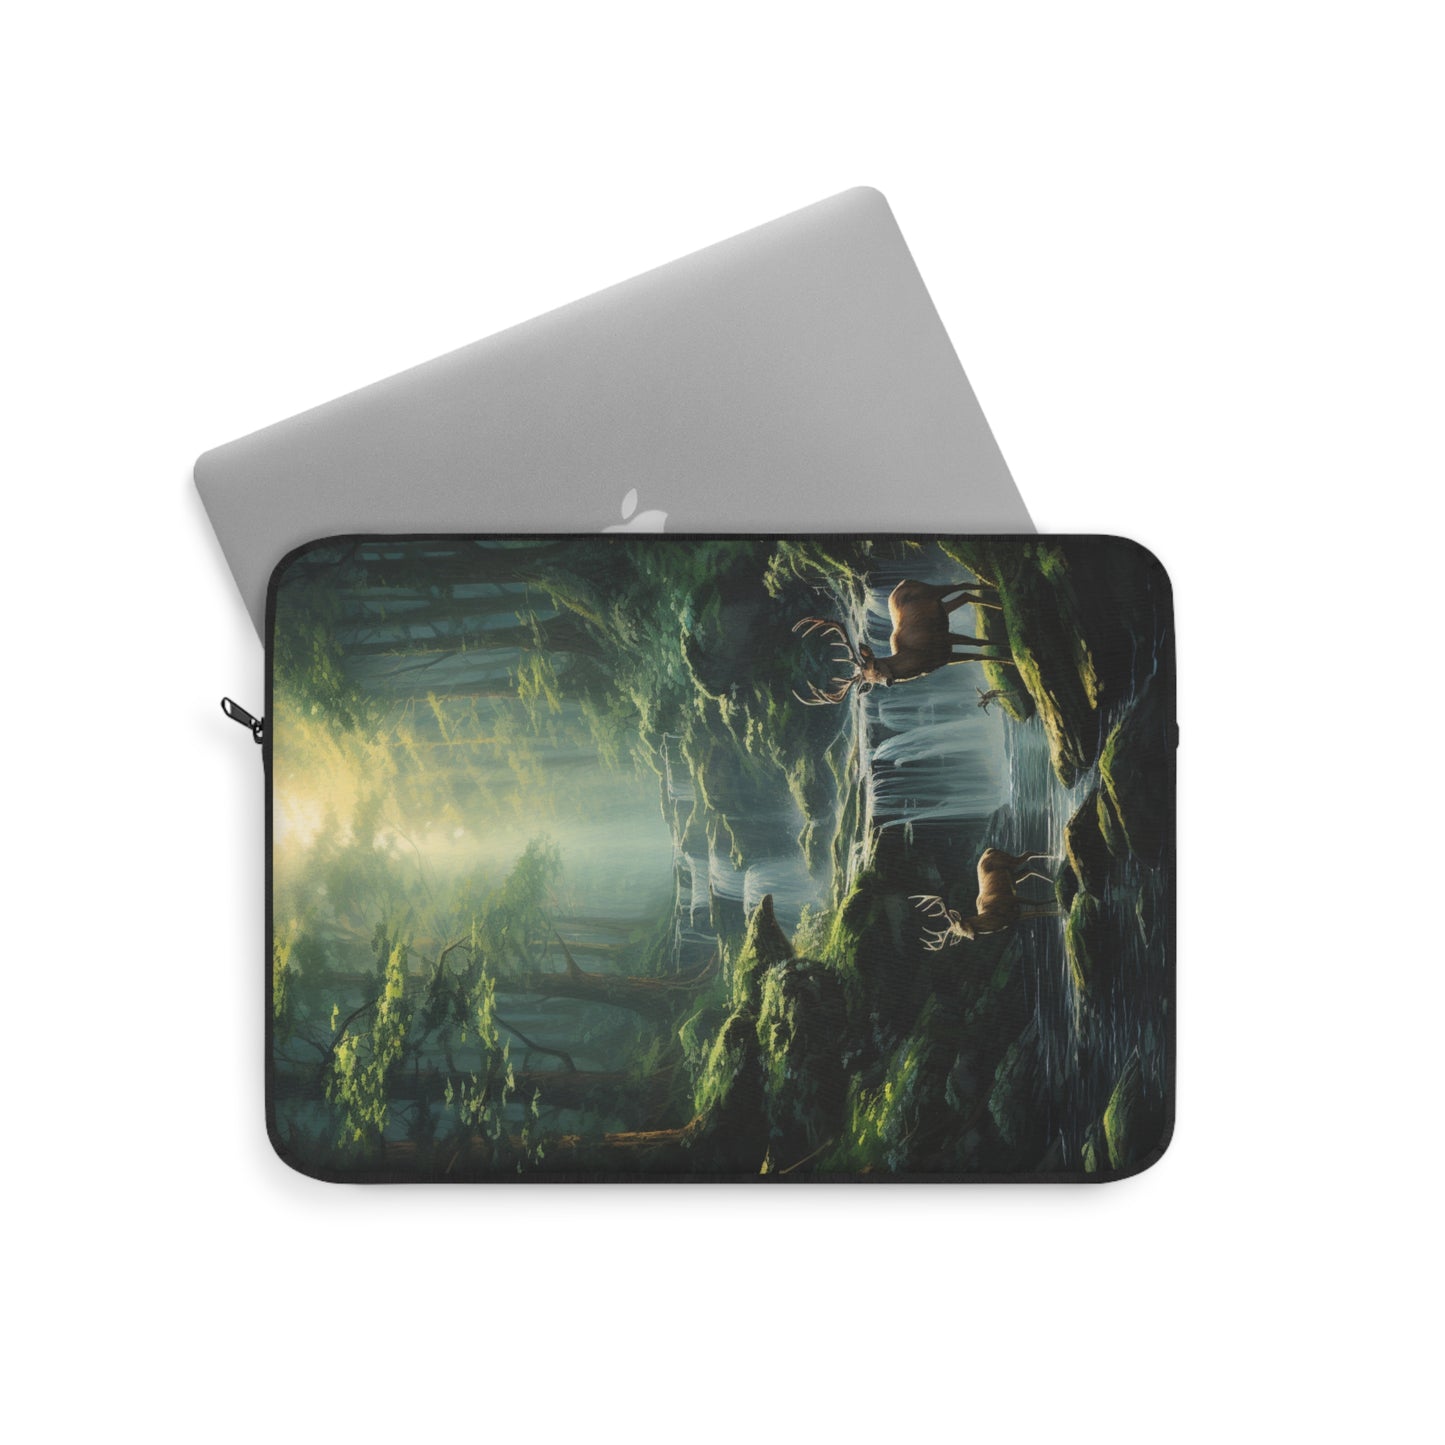 Waterfall of Life Laptop Sleeve | Tablet Cover Deer Buck Stag Waterfall Forest Woods Nature God's Country Outdoors Computer Case Beautiful